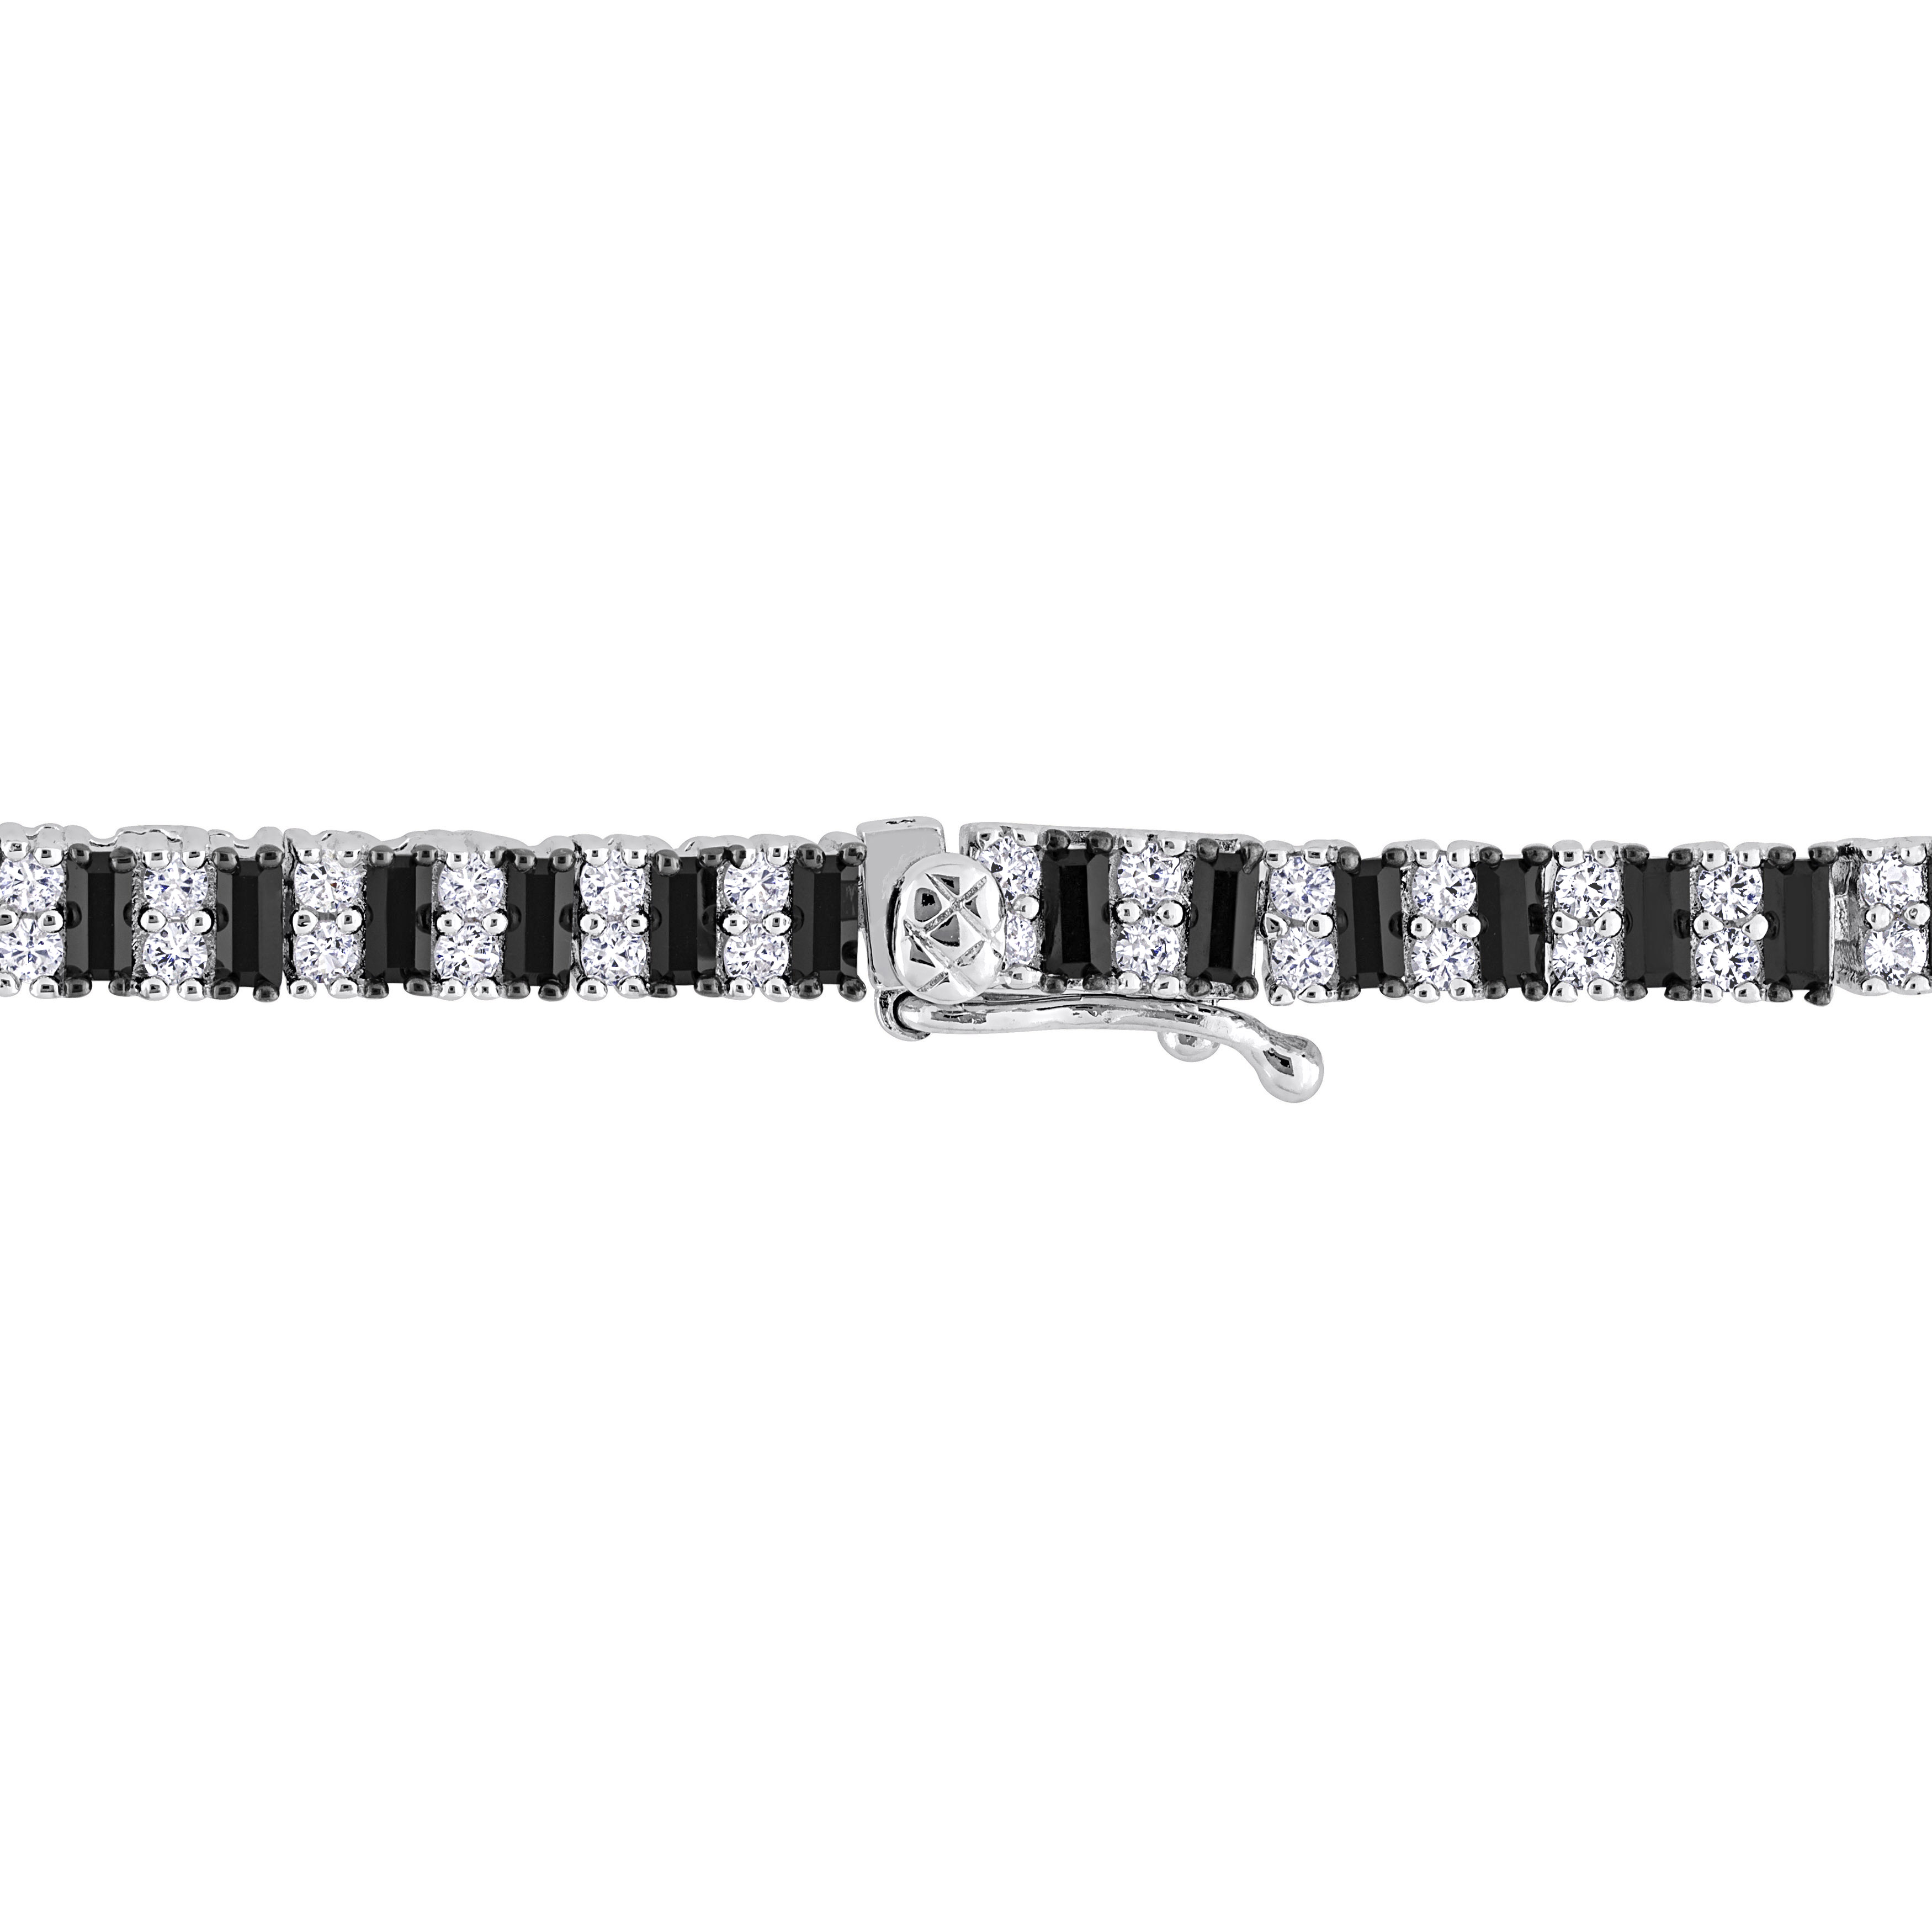 7 3/5 CT TGW Baguette-Cut Black Spinel and Created White Sapphire Tennis Bracelet in Sterling Silver - 7.25 in.